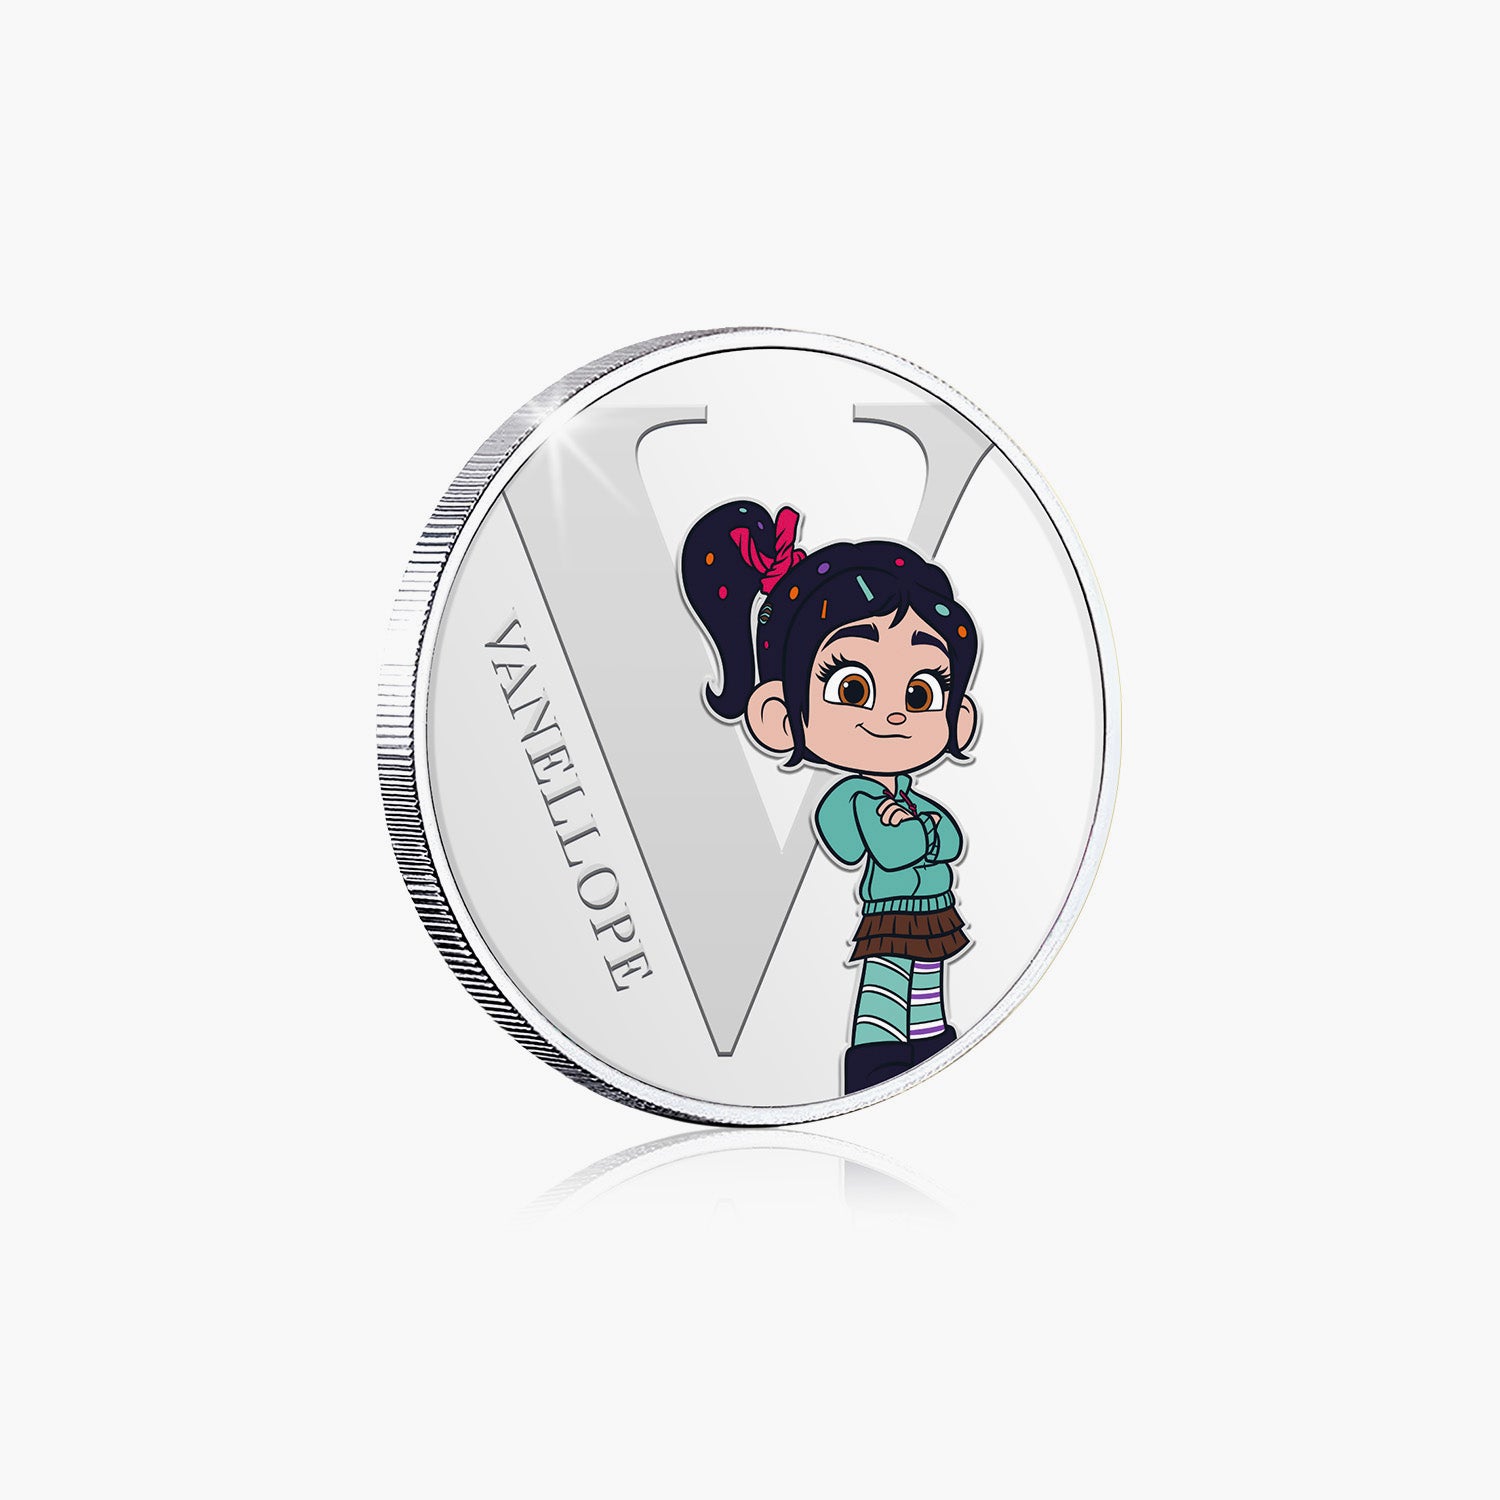 V is for Vanellope Silver-Plated Full Colour Commemorative